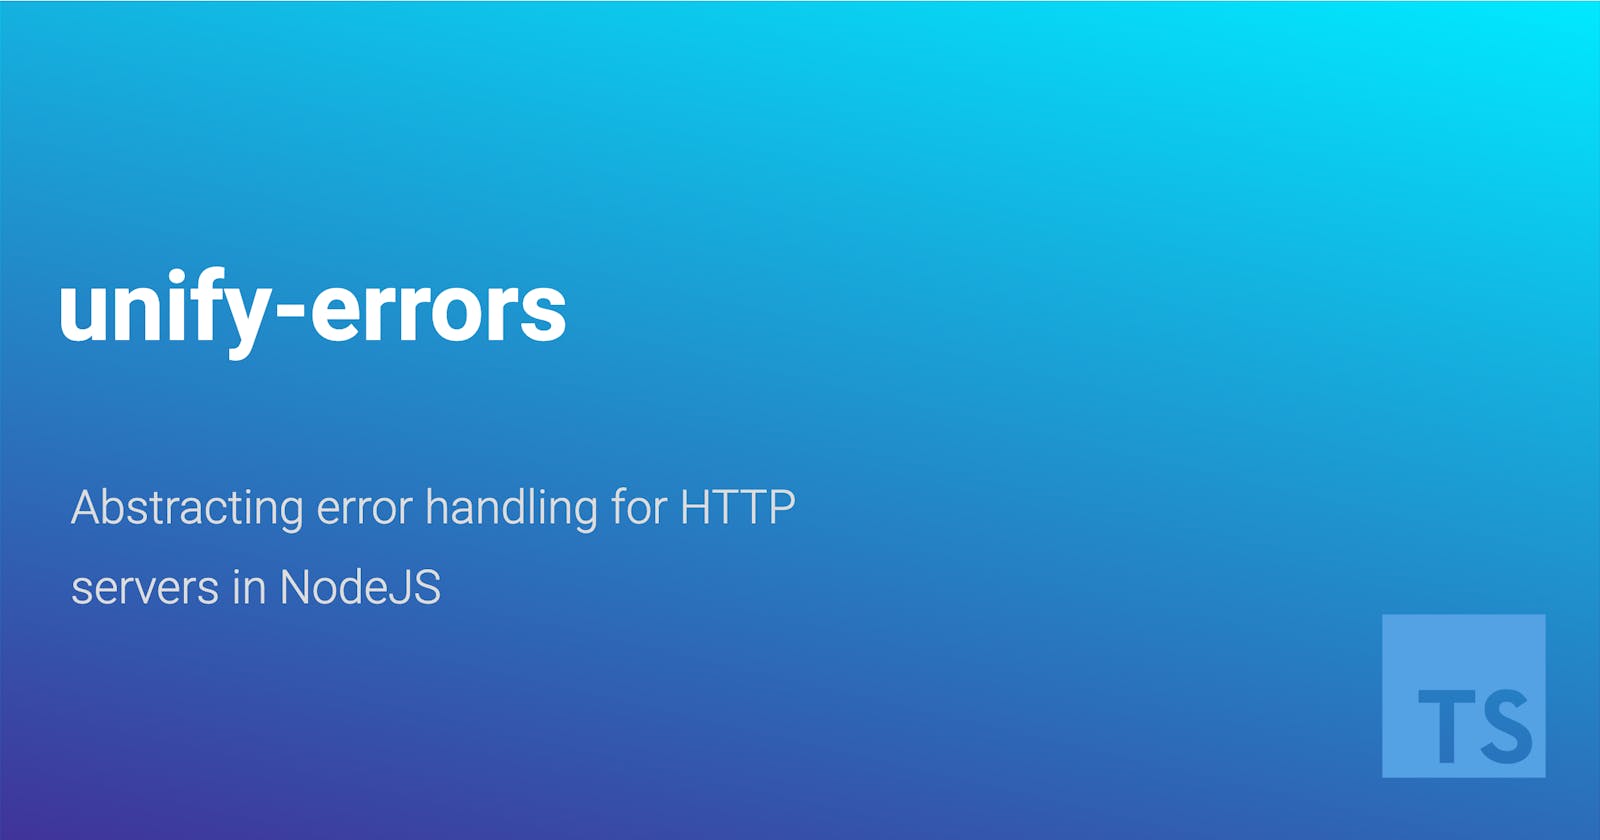 unify-errors : Unify all errors across protocols and libs